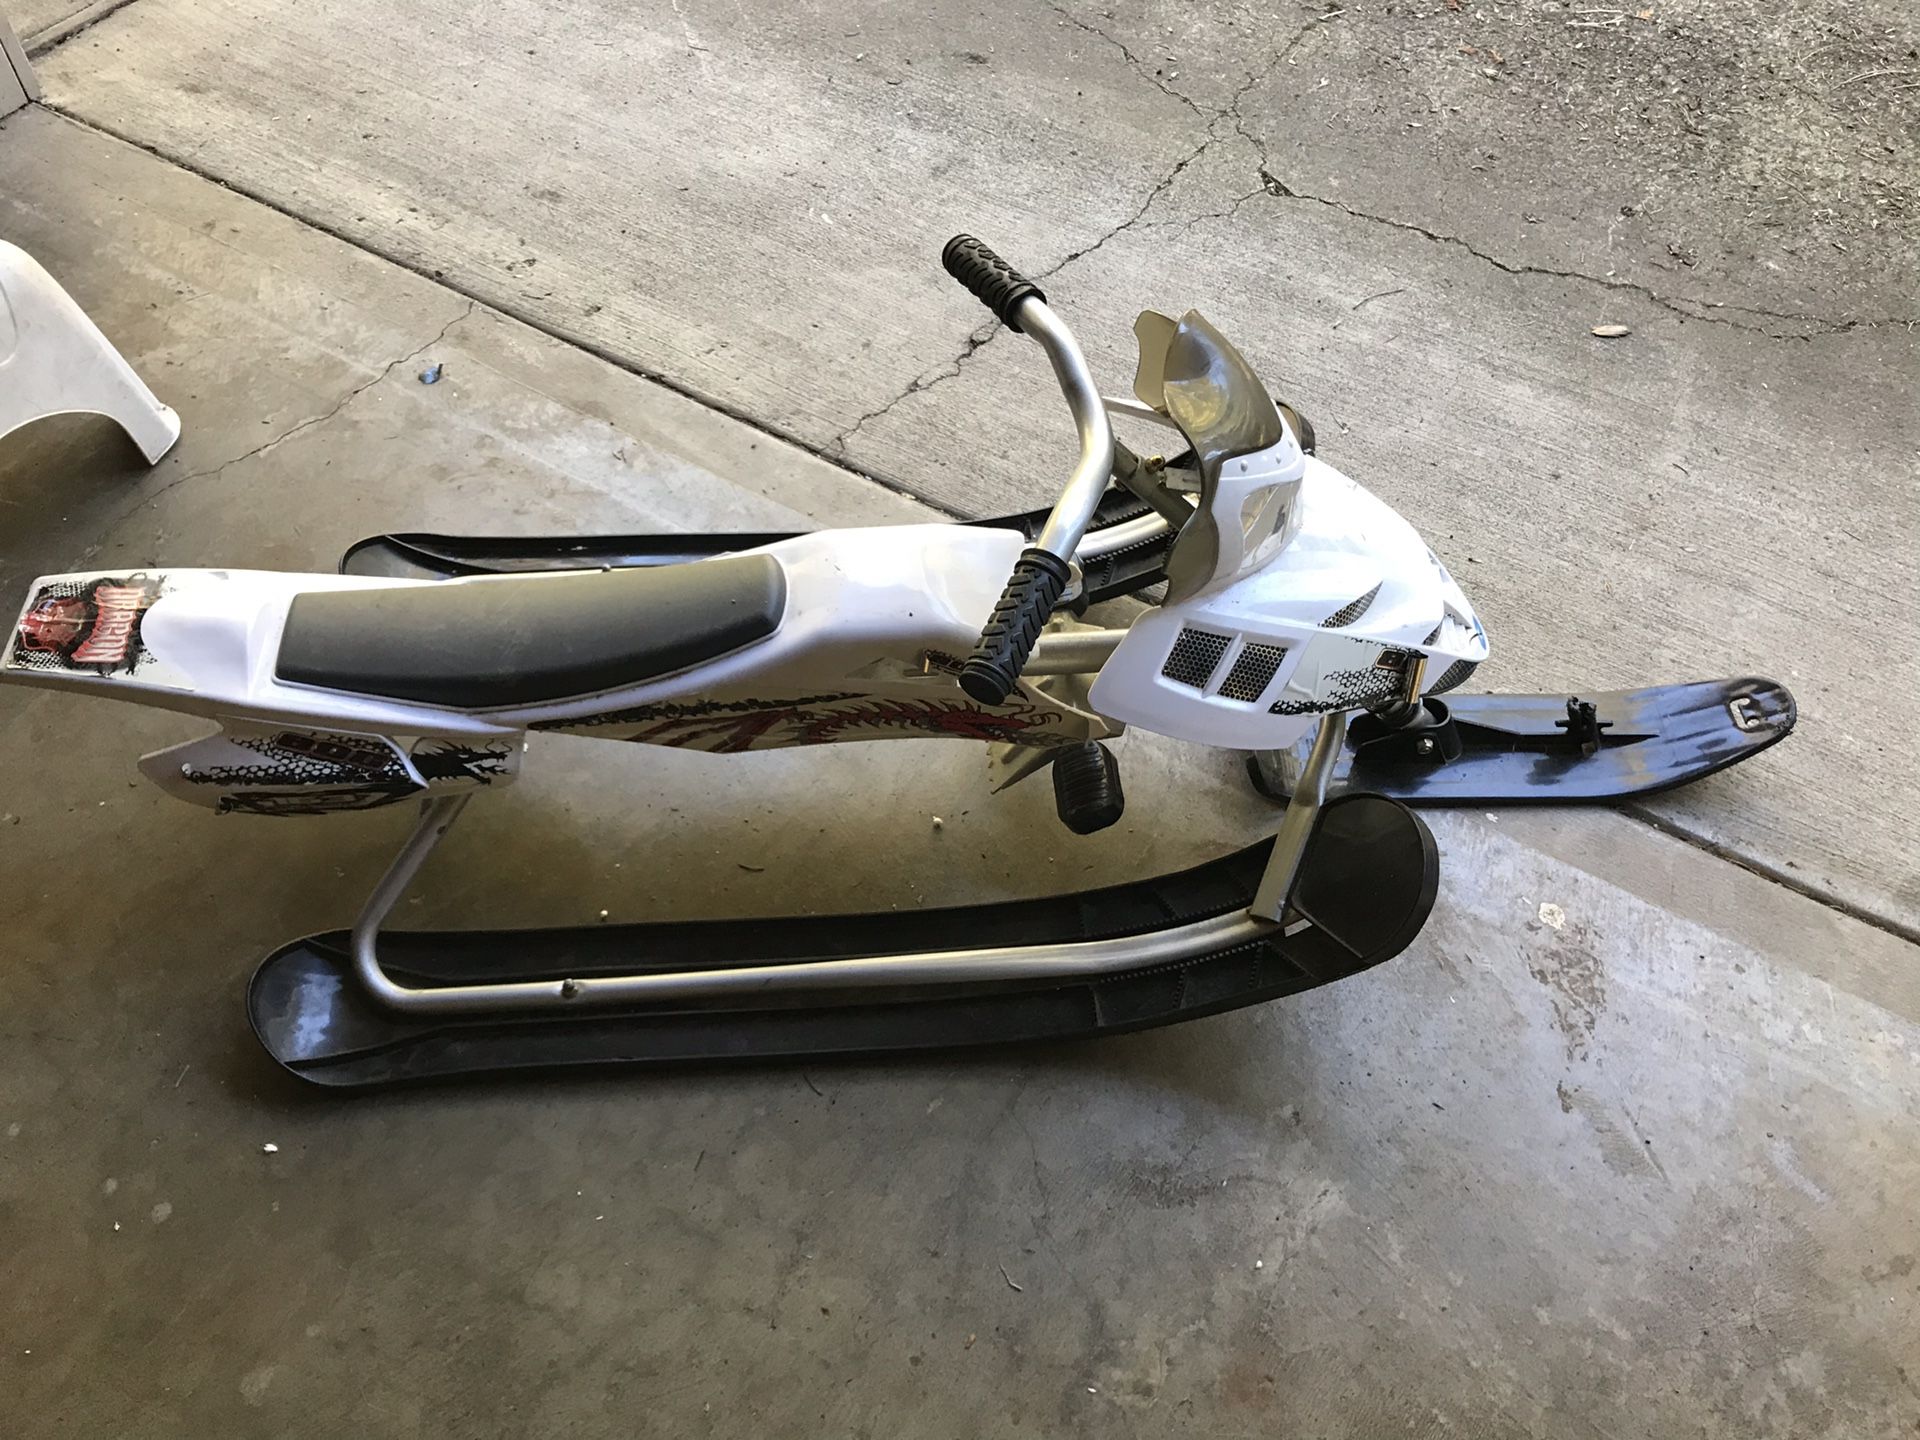 Snowmobile ages 5-12ys